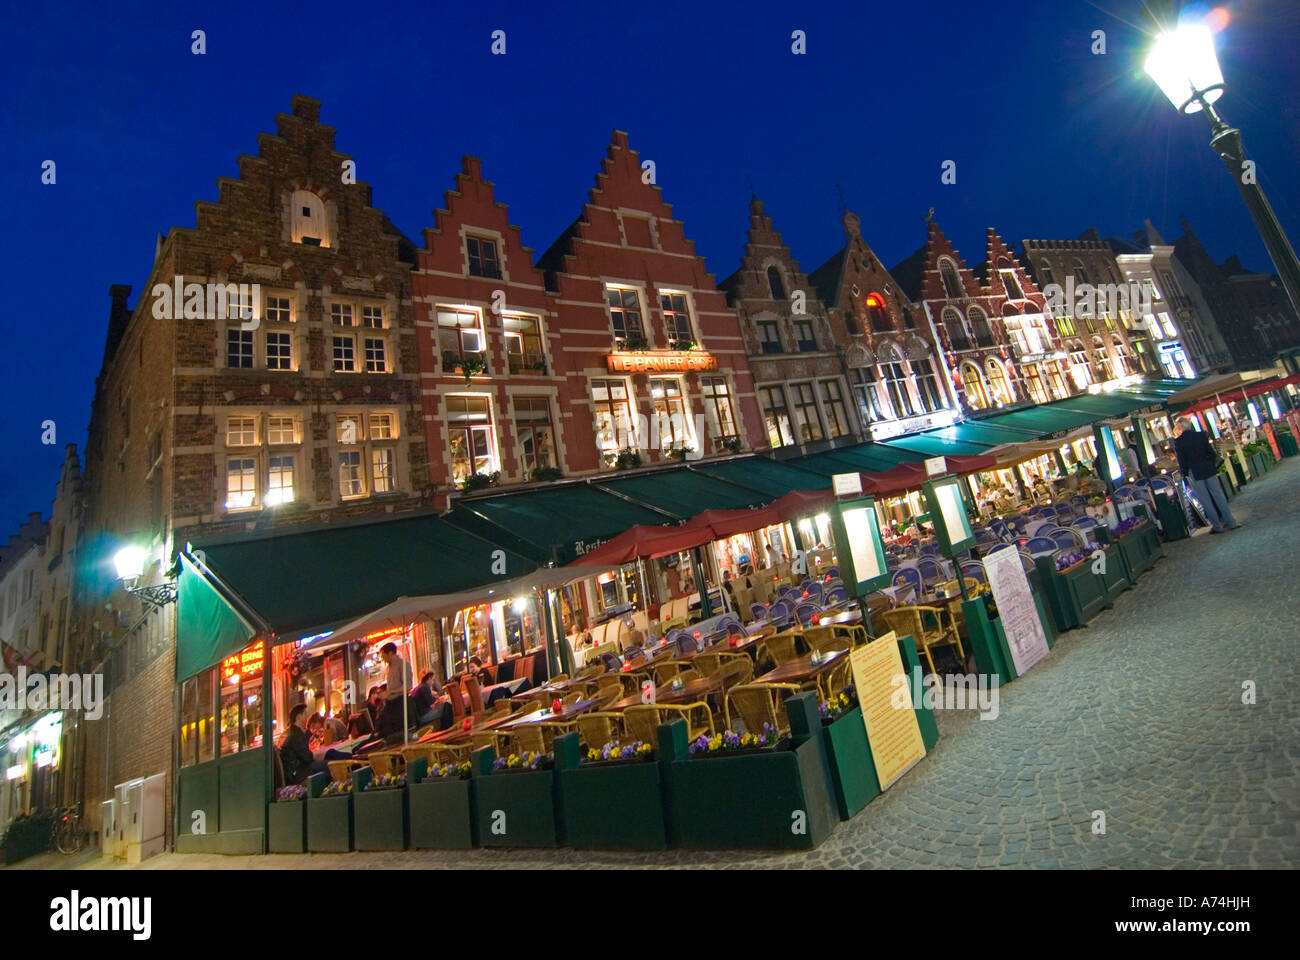 Horizontal wide angle of a row of traditional gabled houses in the Markt [Market Place] illuminated at night. Stock Photo